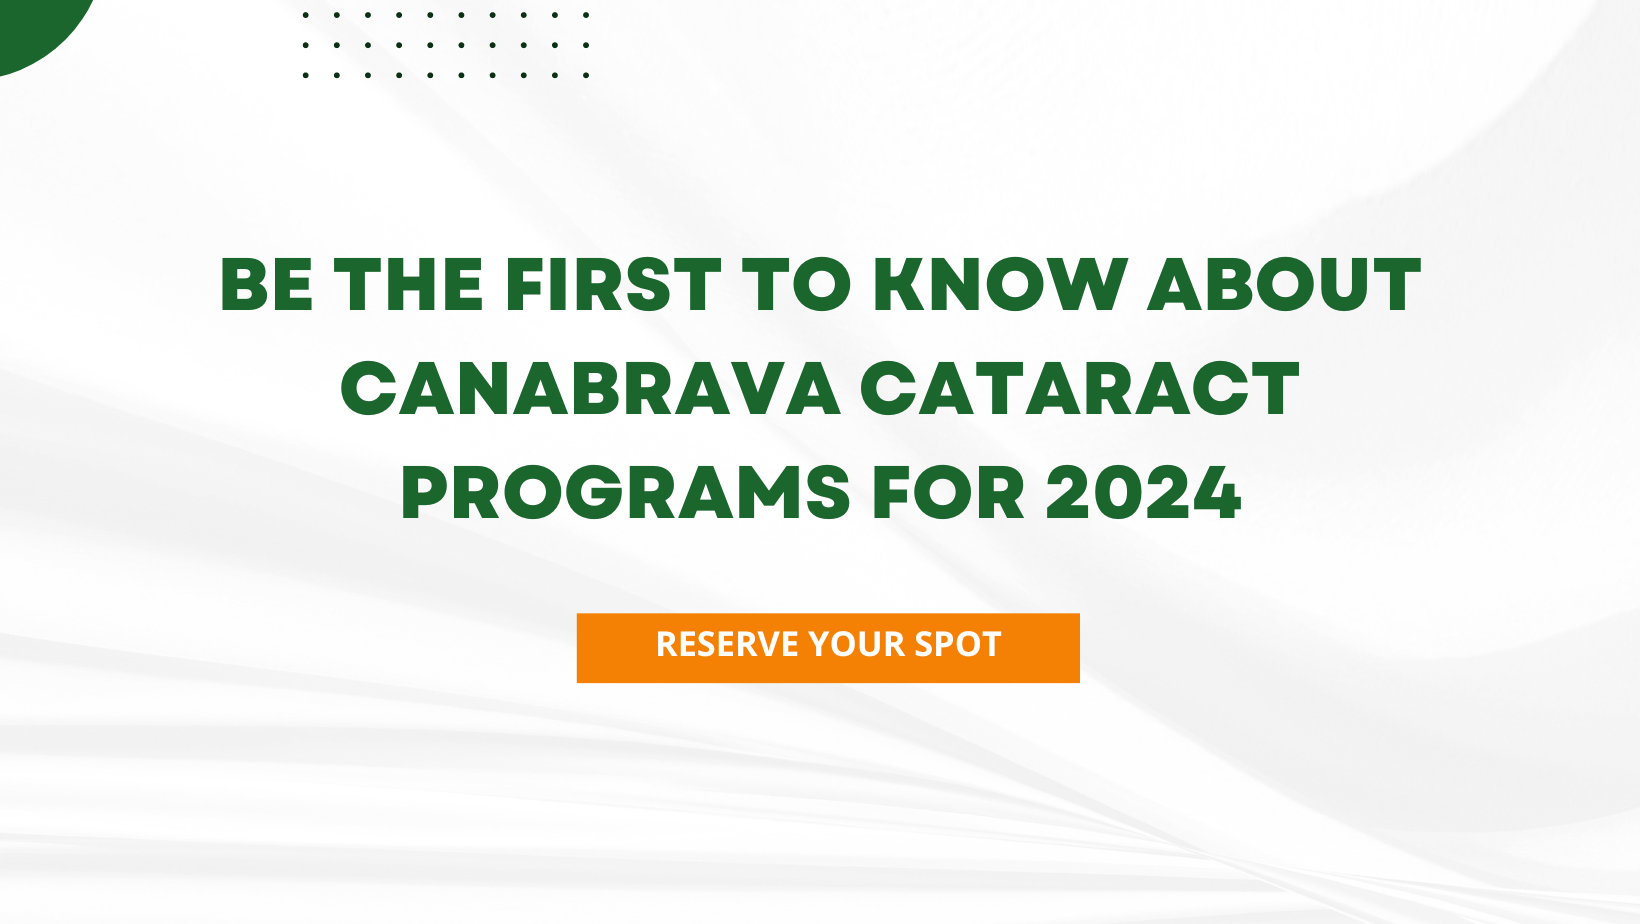 Be the first to know about Canabrava Cataract programs for 2024